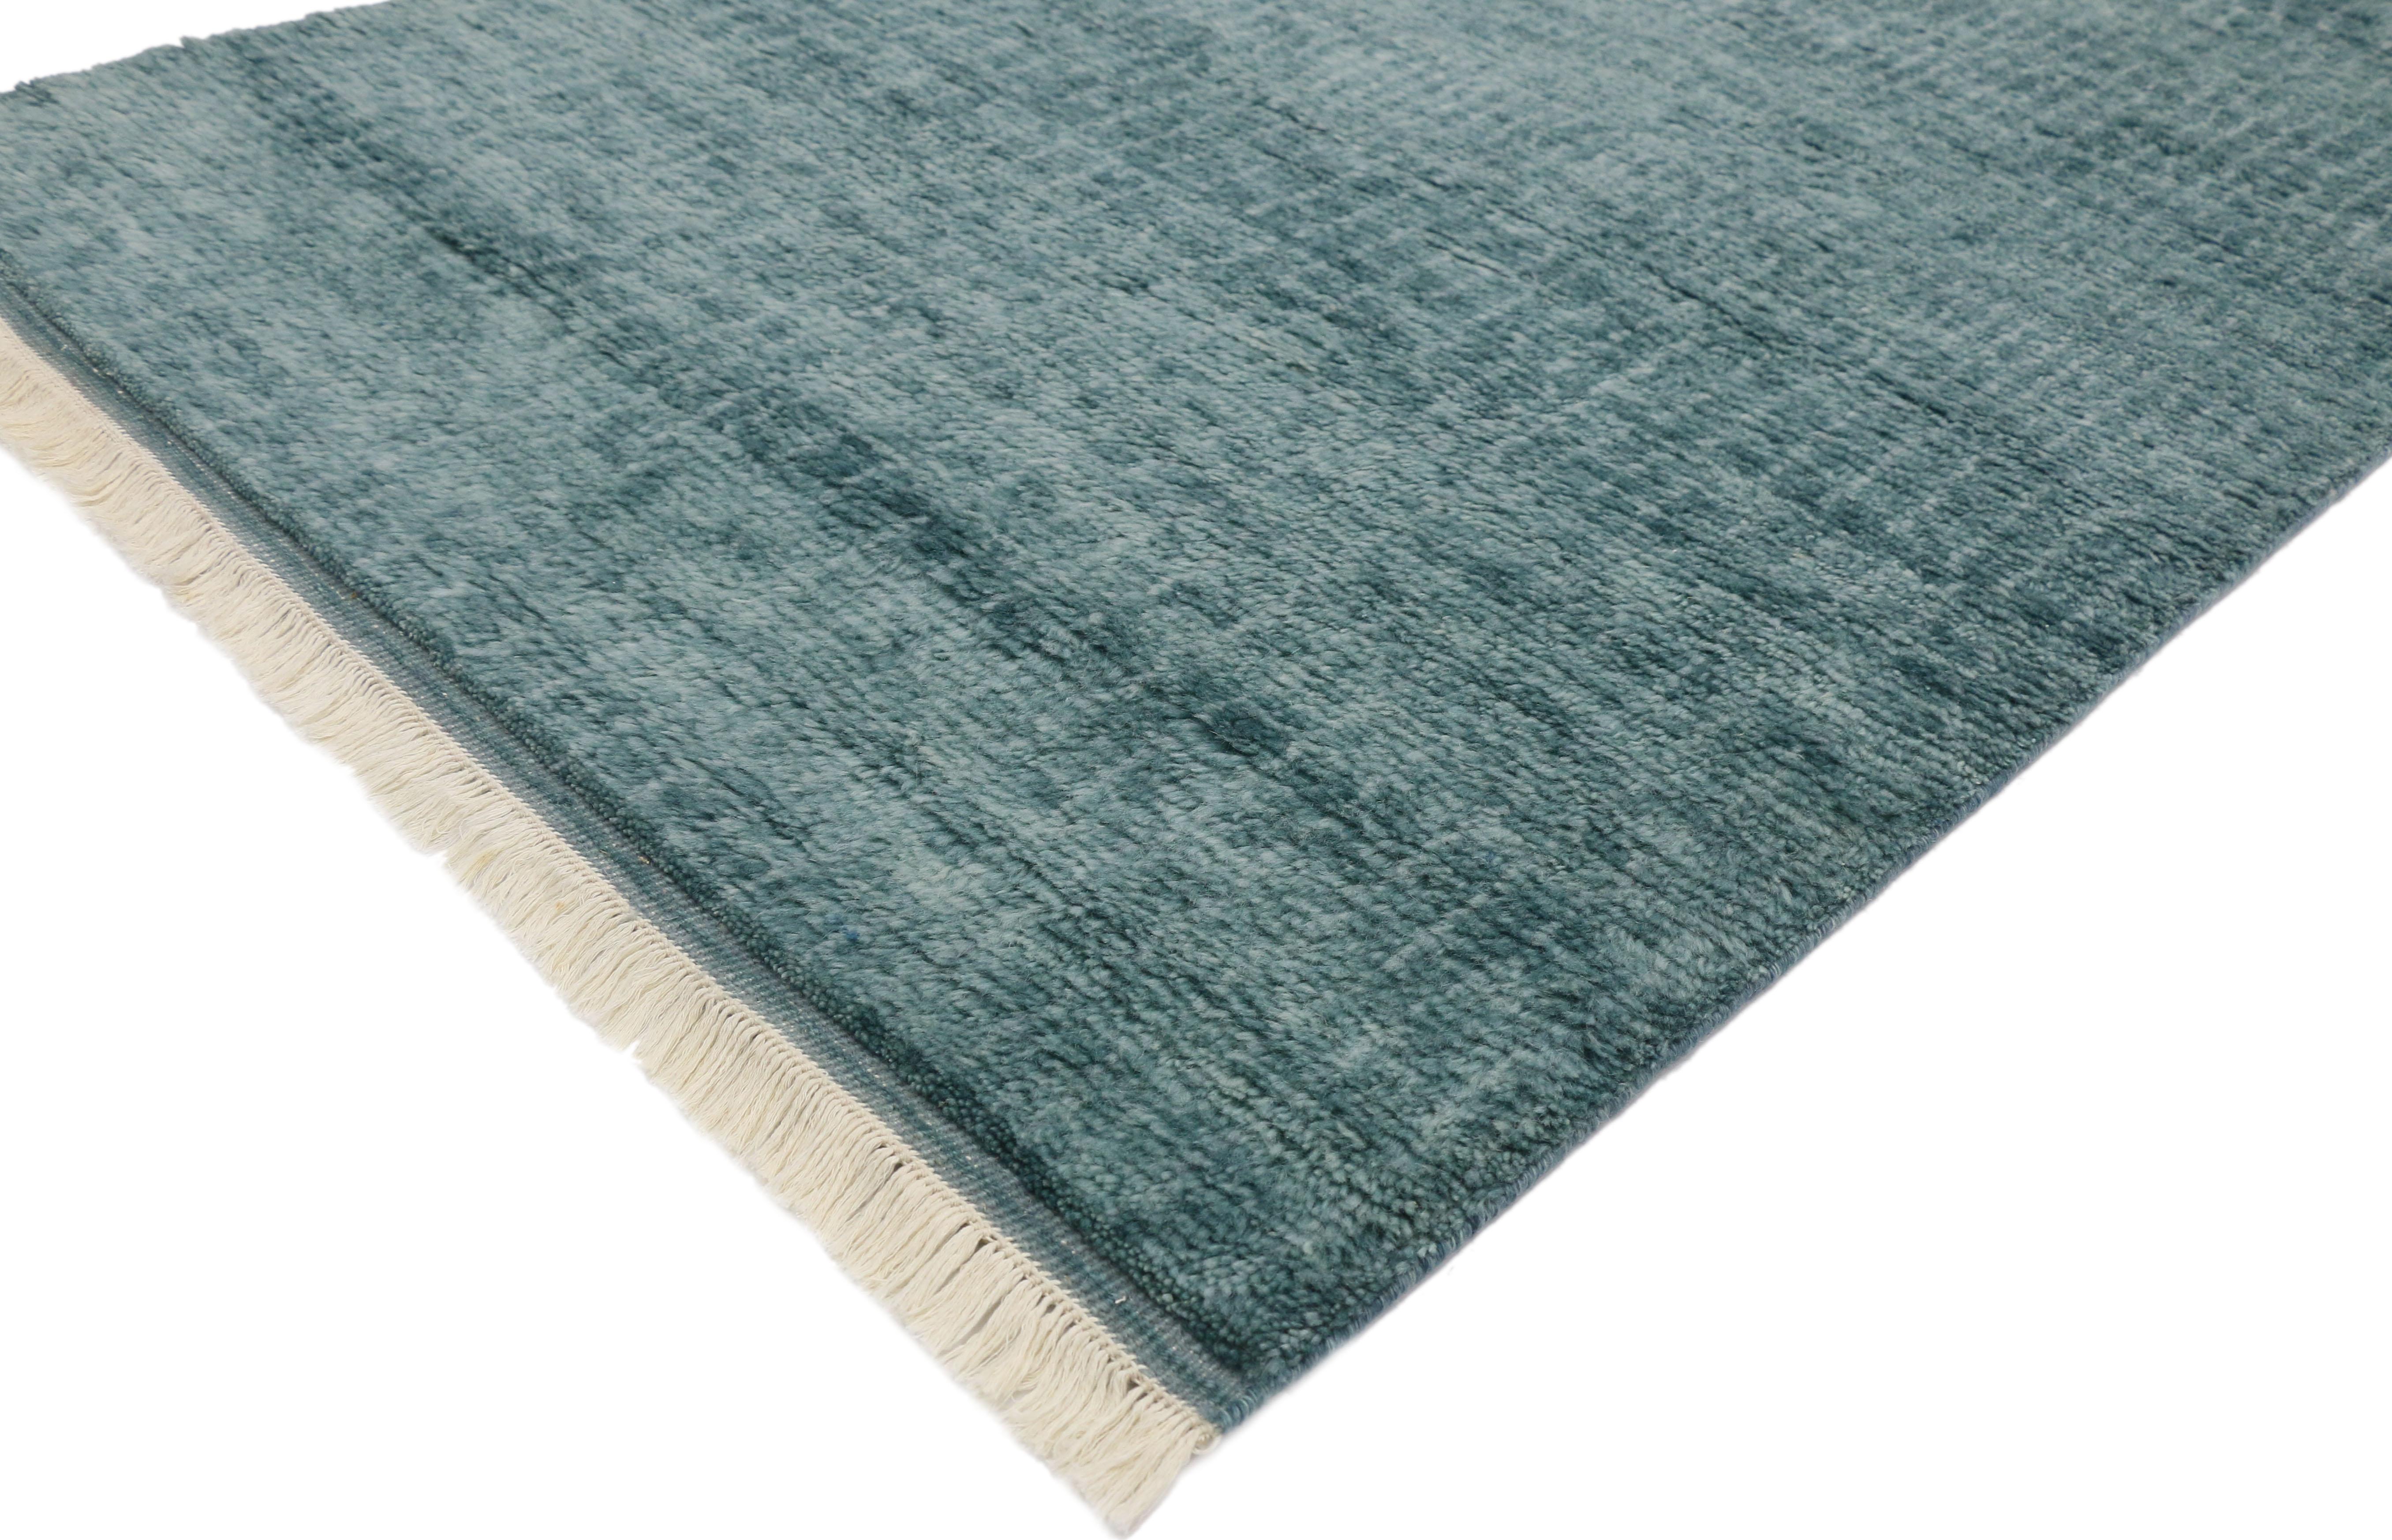 30491, new contemporary Beach Hygge Moroccan rug with modern Cape Cod style. Cozy contemporary meets Beach Hygge style while providing relaxation and a vision of aesthetic perfection. The subtle abstract design combined with the teal hues create a